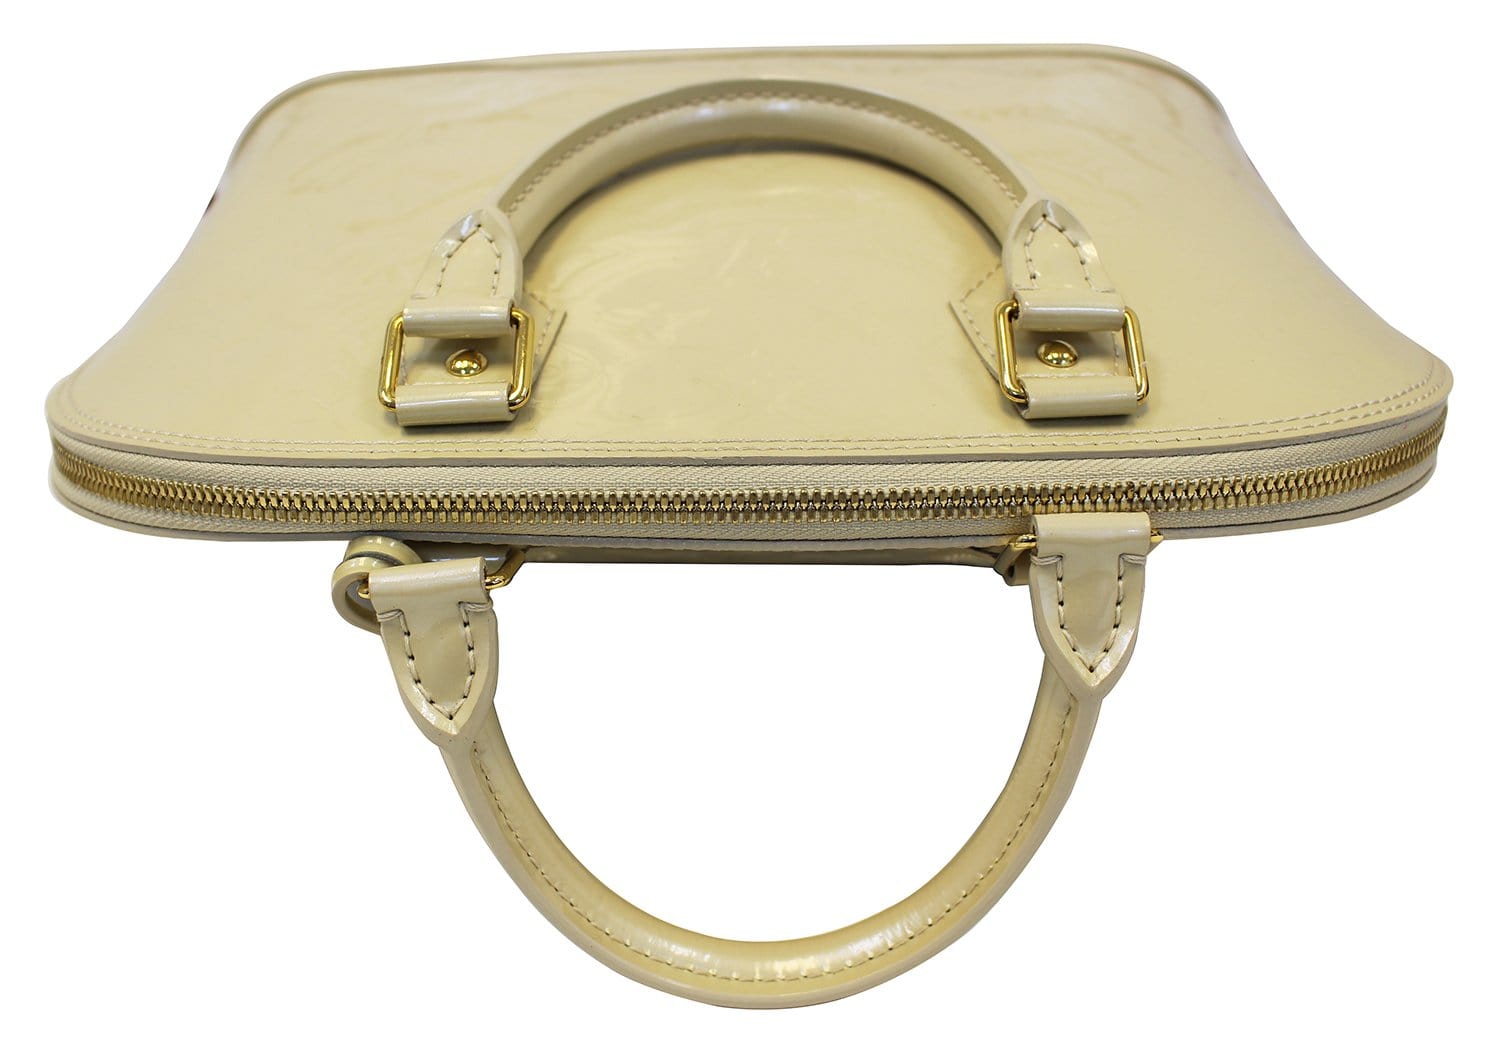 Beverly leather handbag Louis Vuitton White in Leather - 19375997